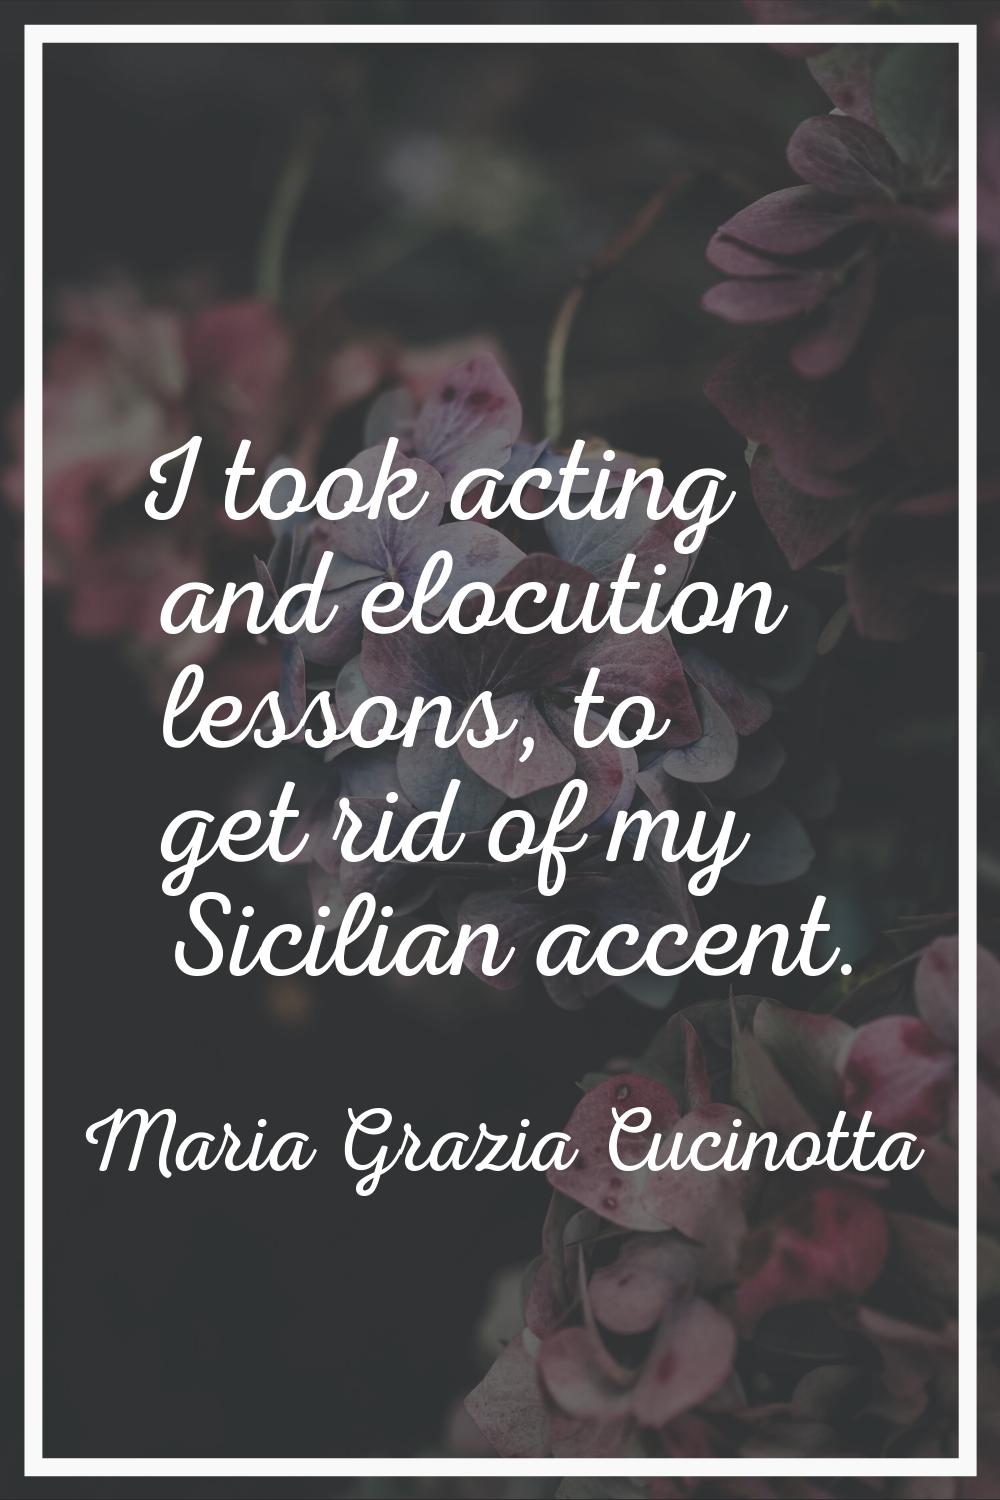 I took acting and elocution lessons, to get rid of my Sicilian accent.